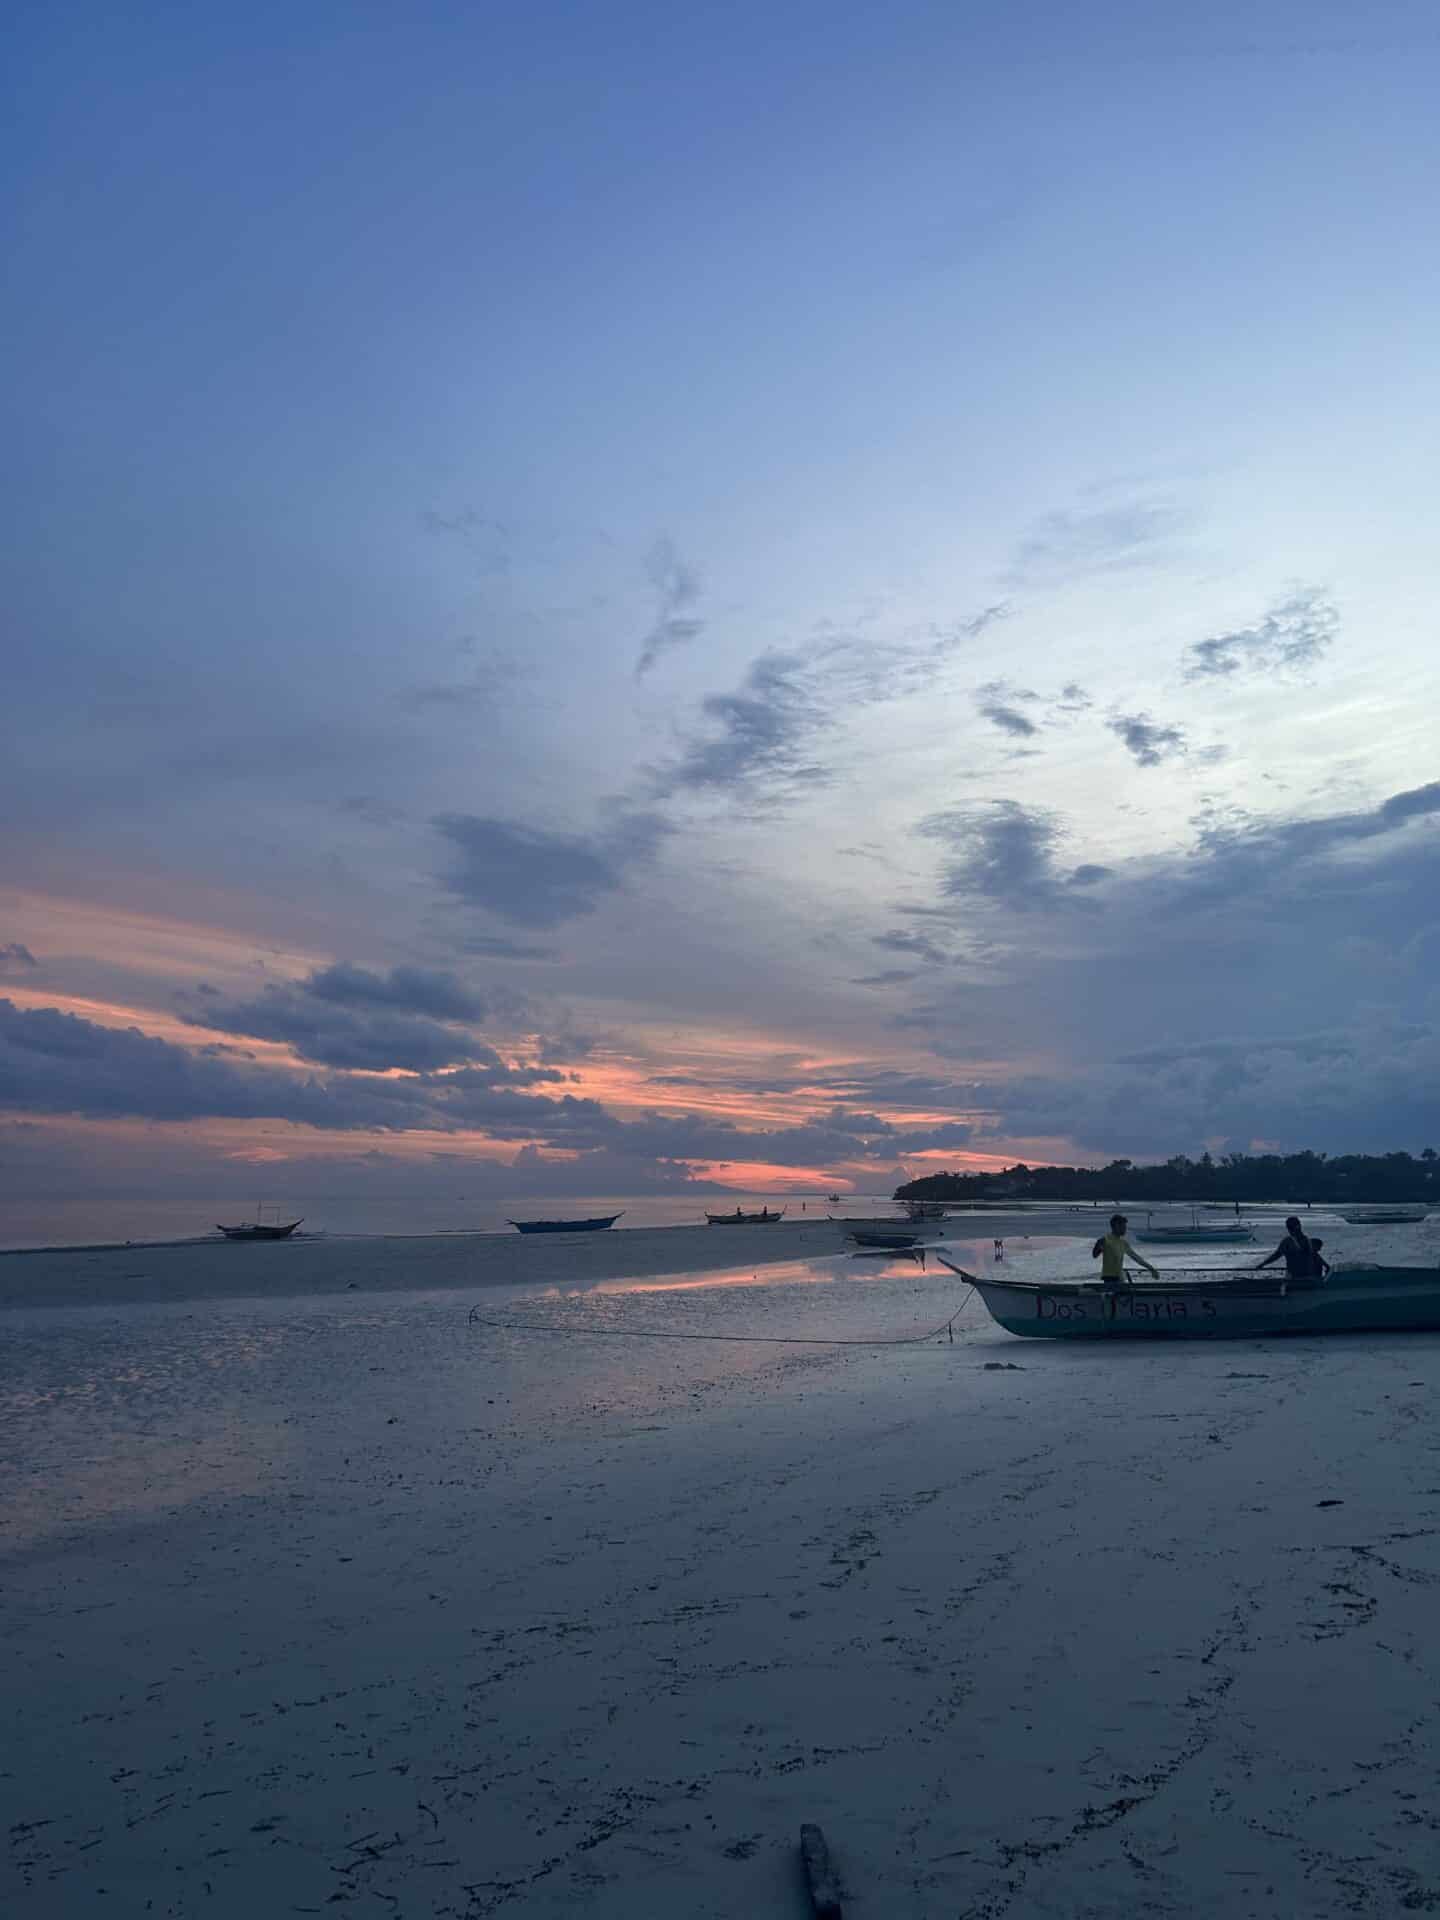 A beach with fishing boats mooring at sunset.